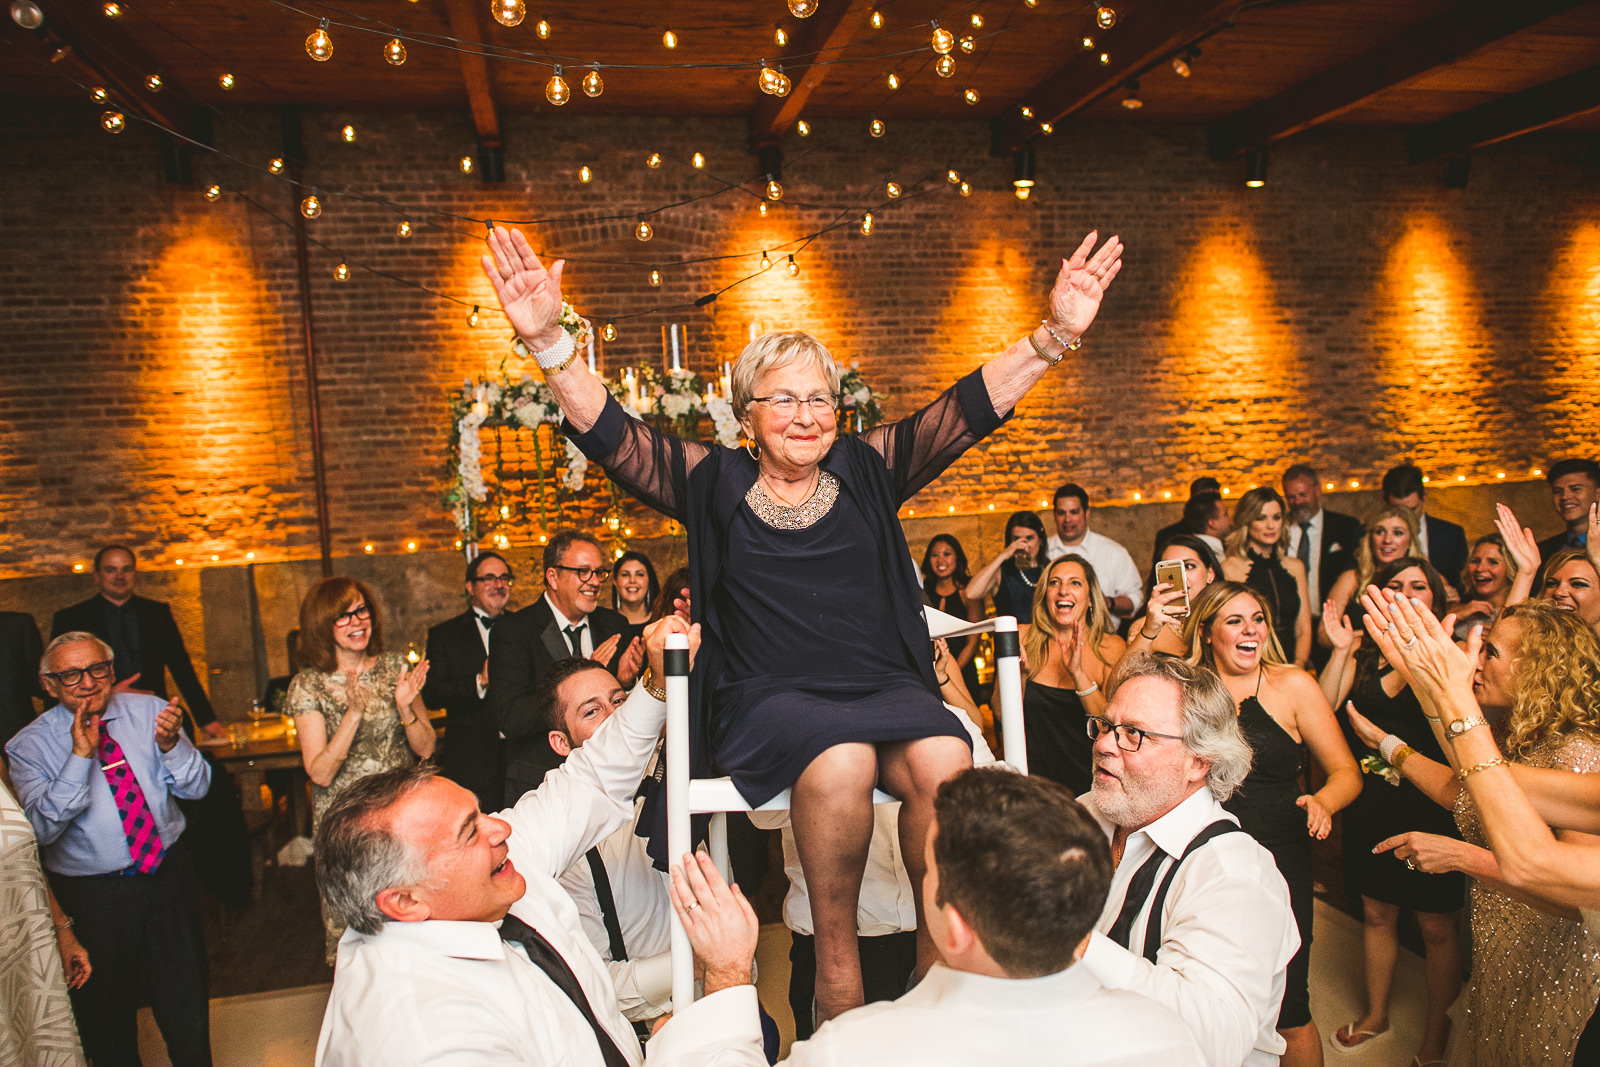 85 awesome hora photos - Chicago Wedding Photography at Gallery 1028 // Courtnie + David